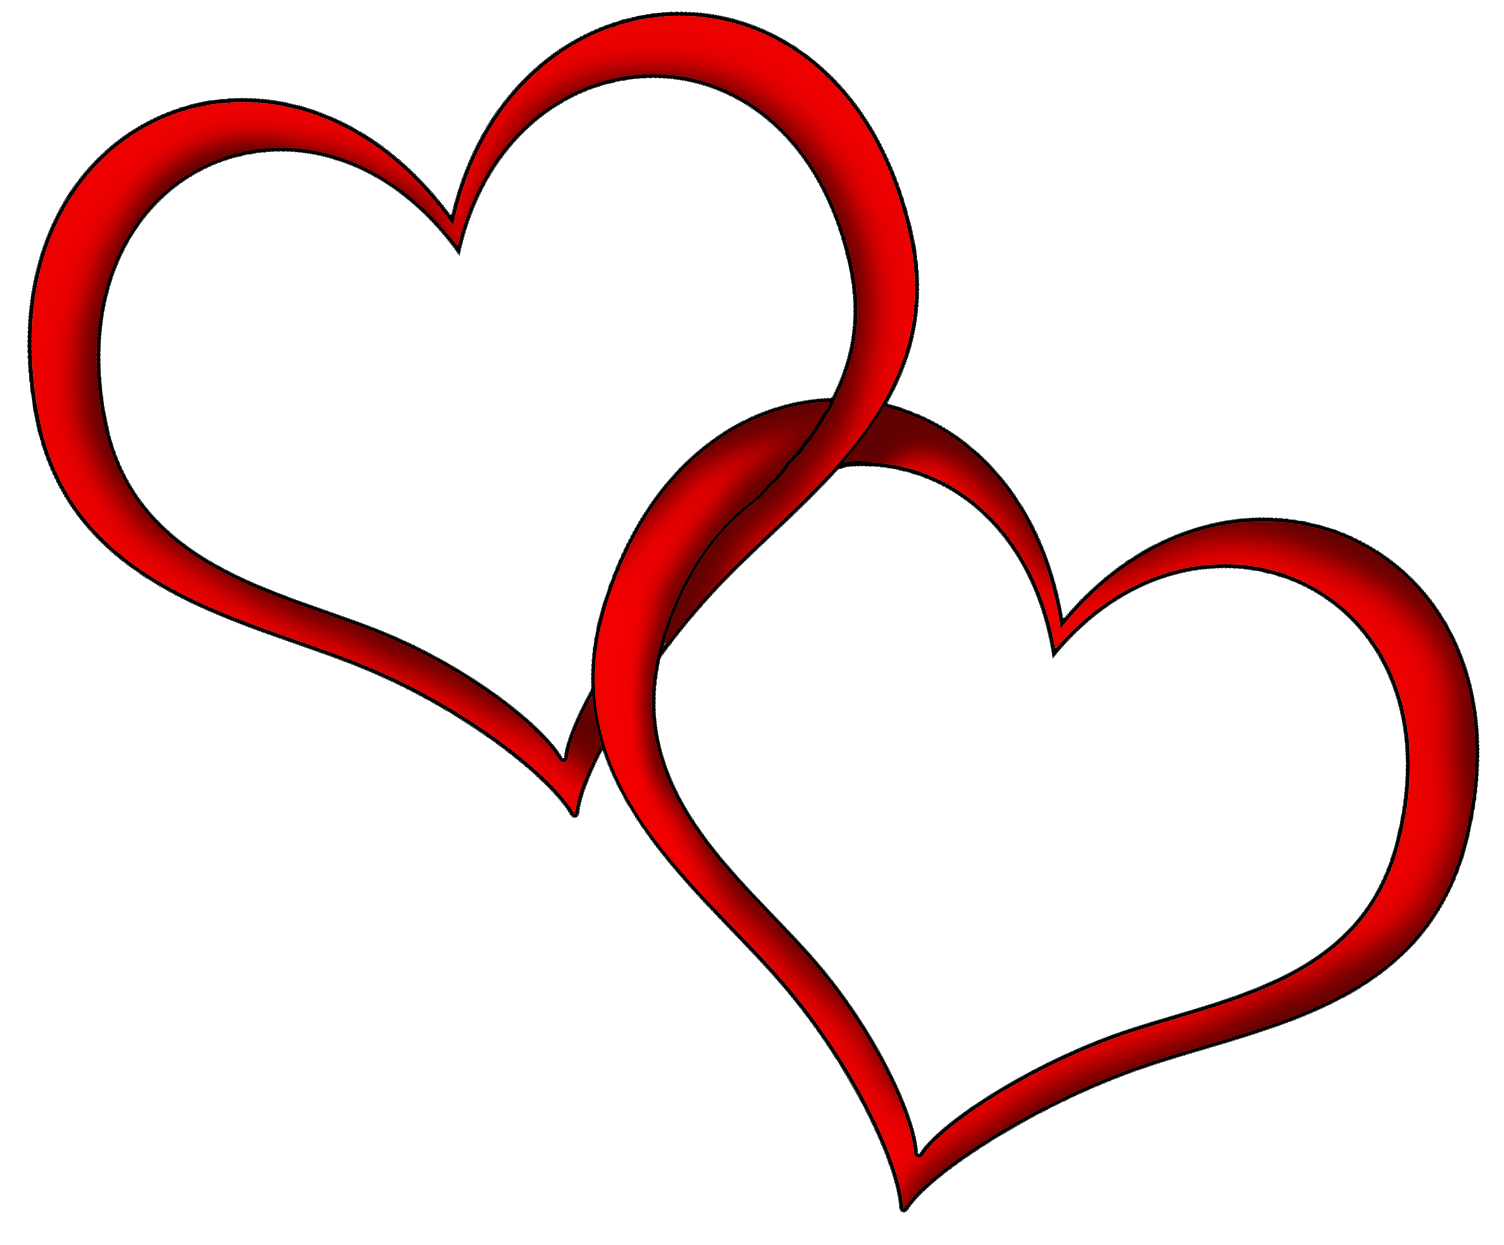 Clipart exercise heart. Hope at getdrawings com